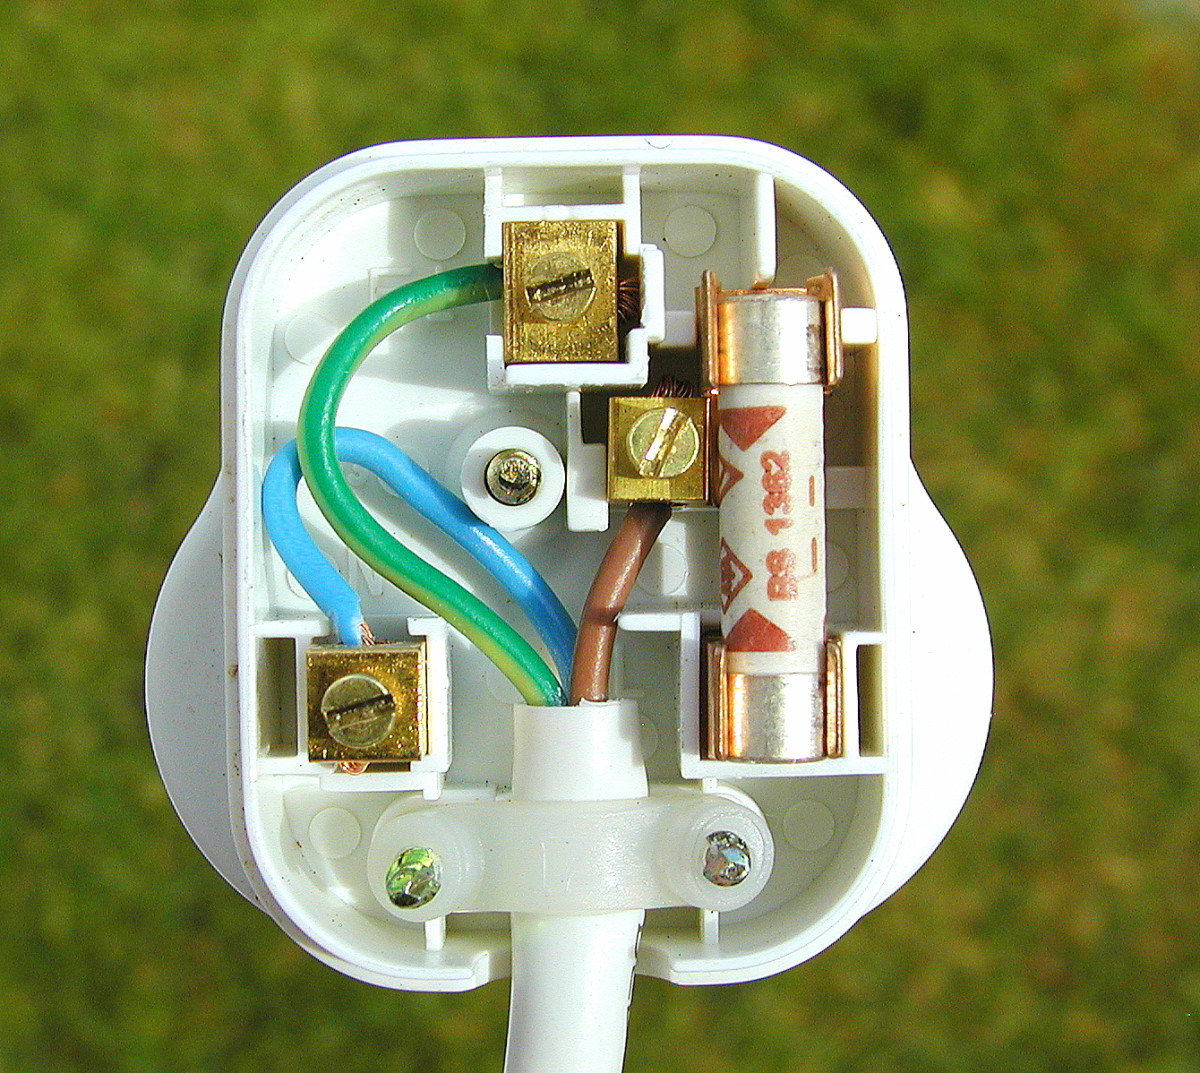 9 Easy Steps to Wiring a Plug Correctly and Safely | Dengarden